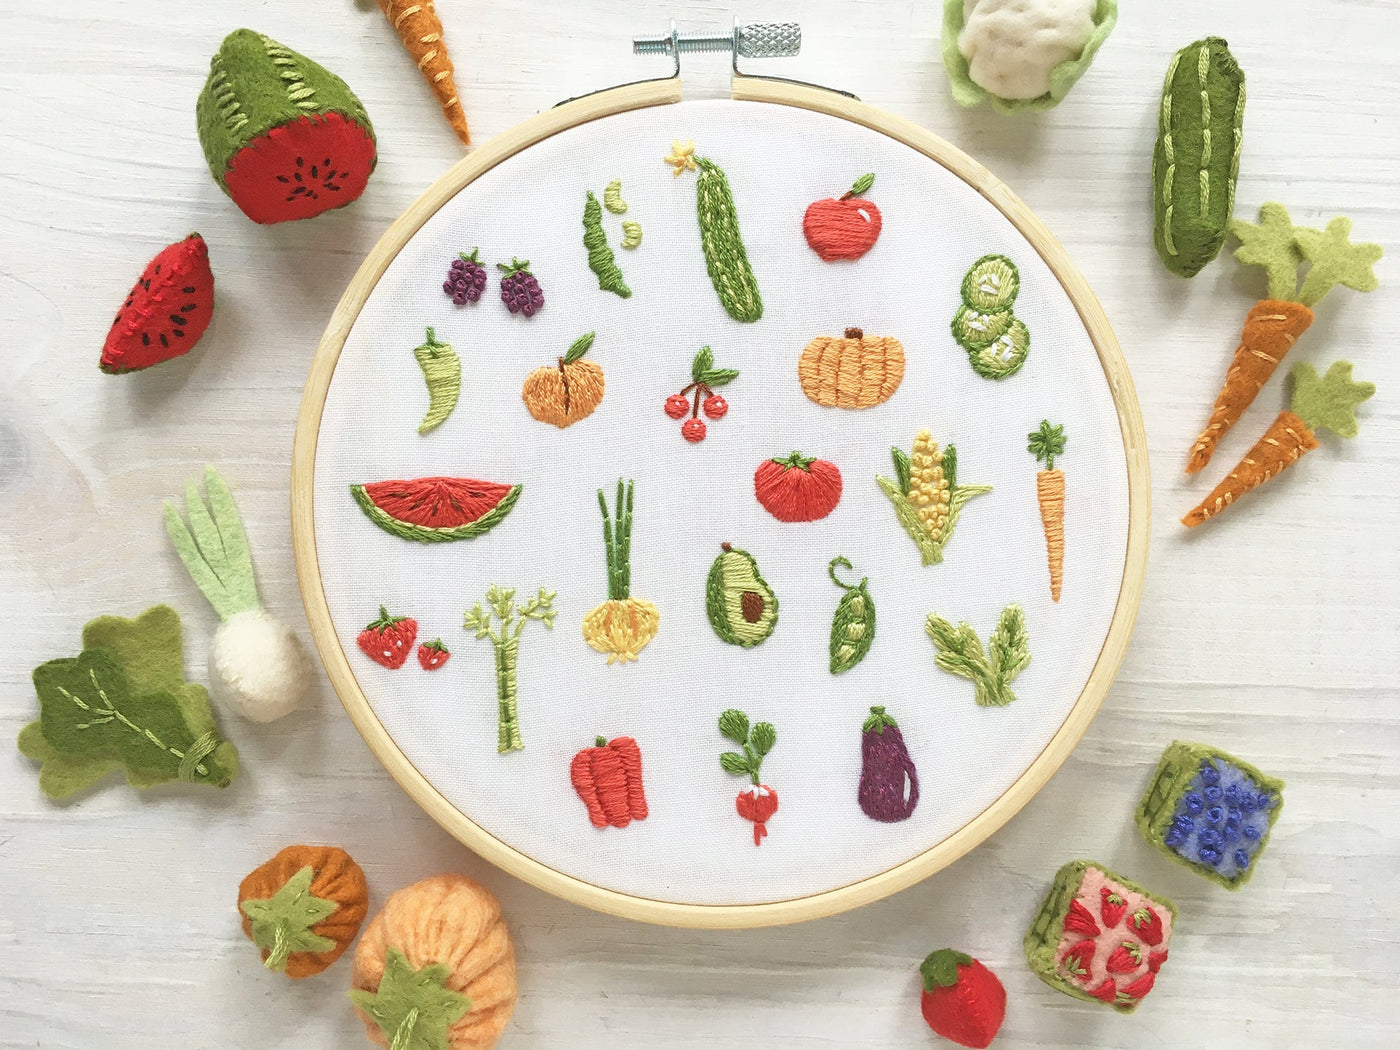 Tiny Sweets and Veggies Hand Embroidery 2 pattern set